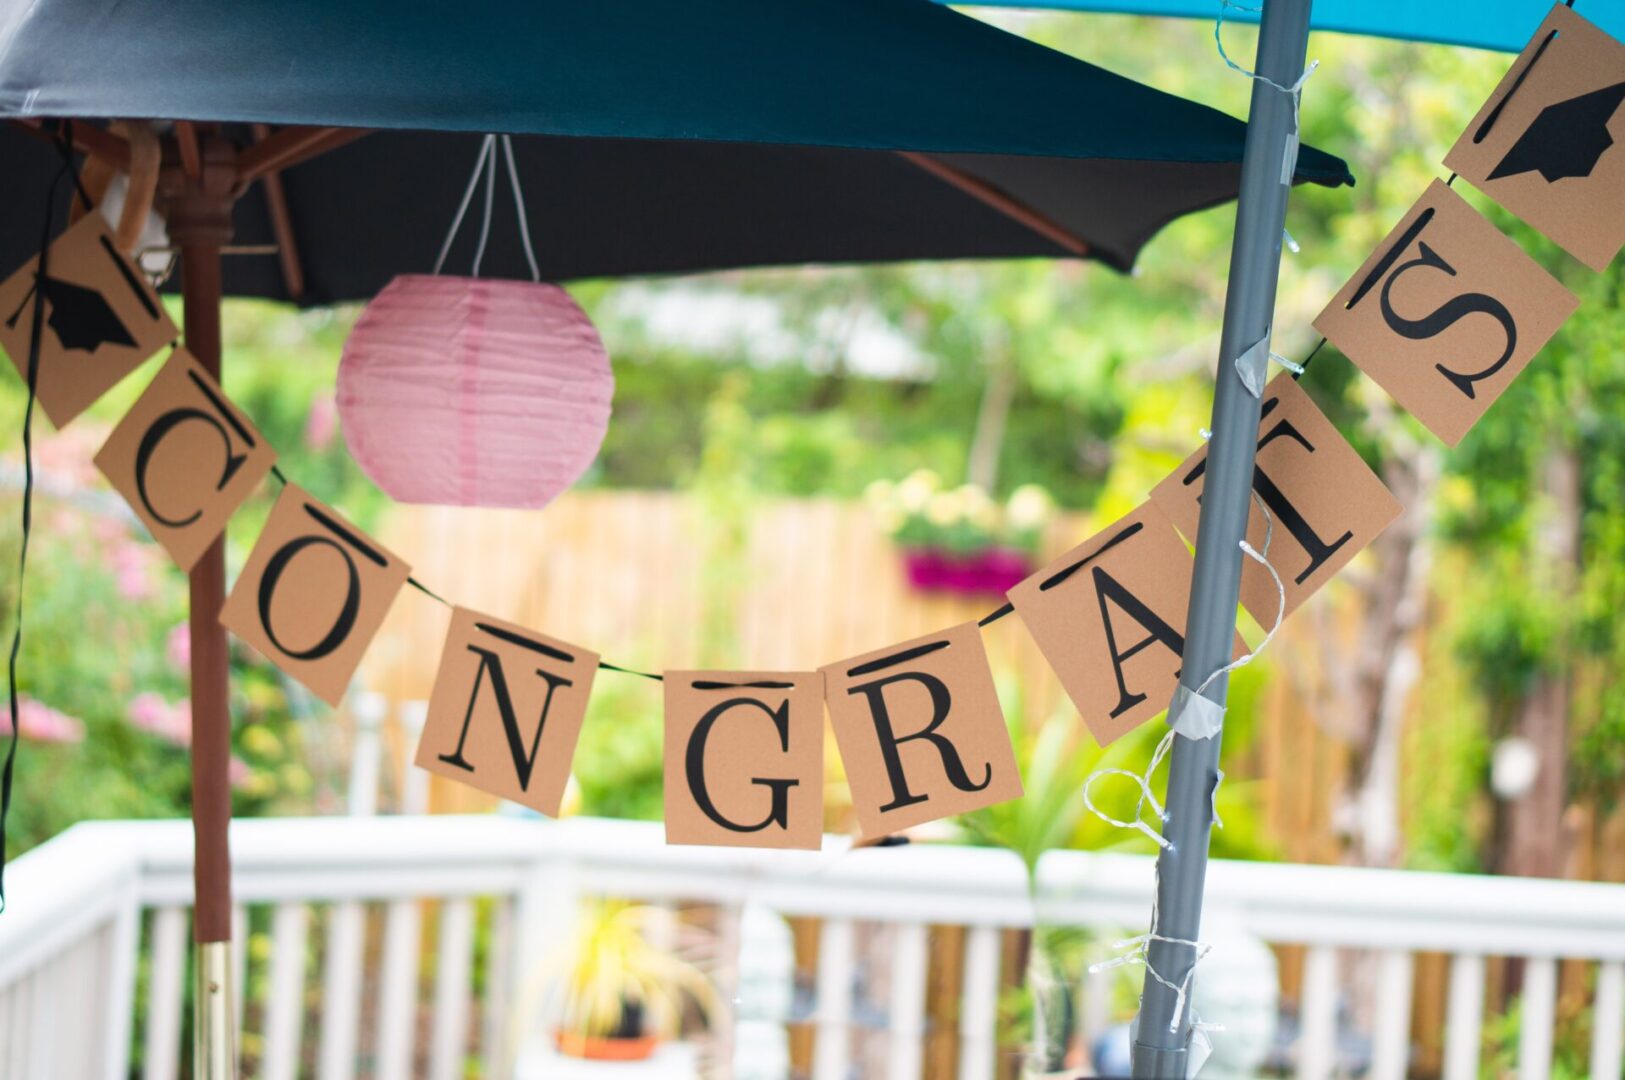 Congrats banner hanged from outdoor table umbrellas